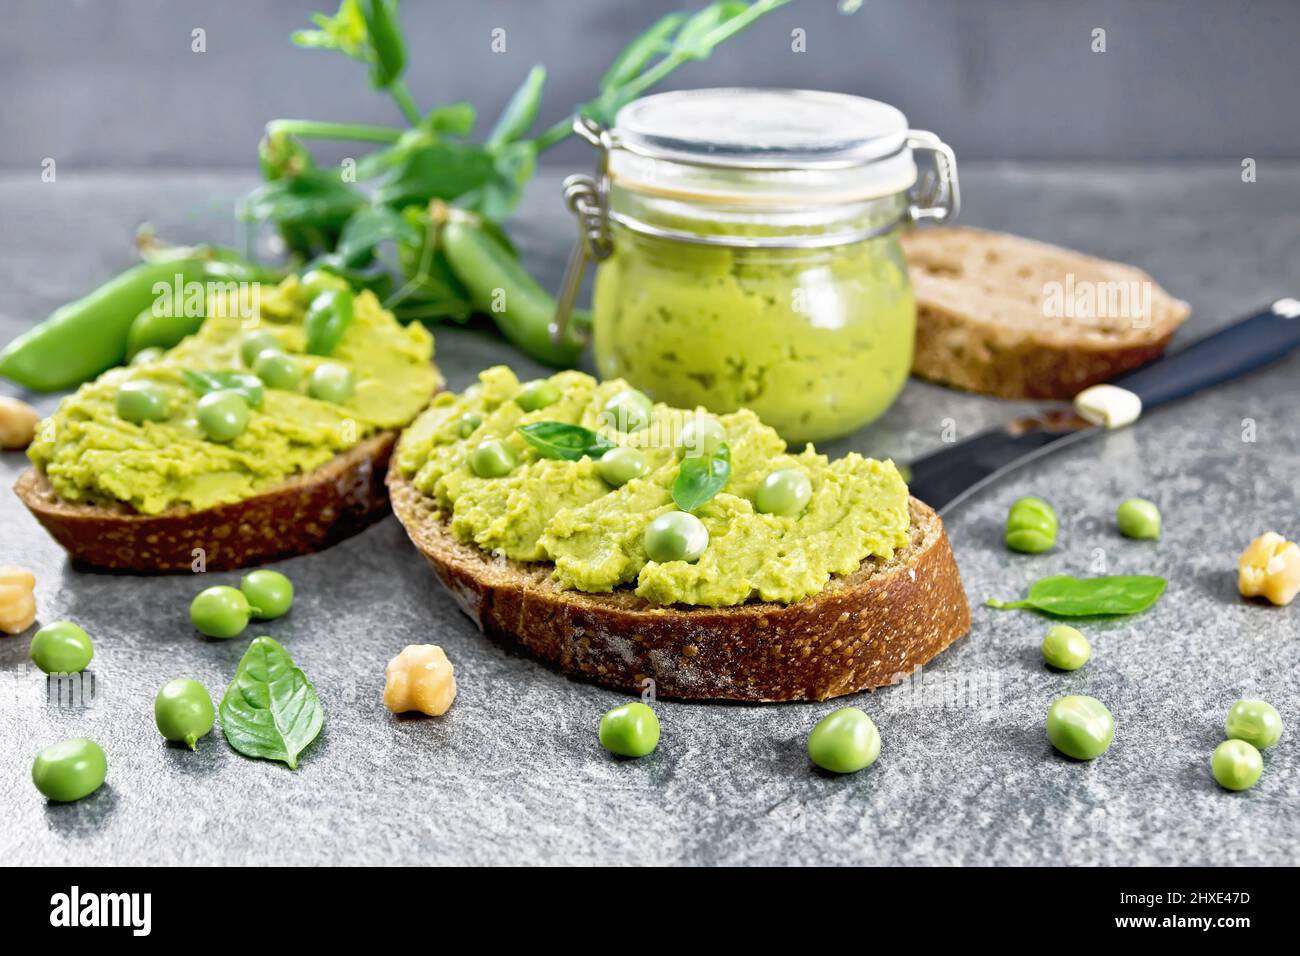 Green pea and chickpea hummus sandwiches, jar of dipping sauce, pea pods on granite countertop background Stock Photo